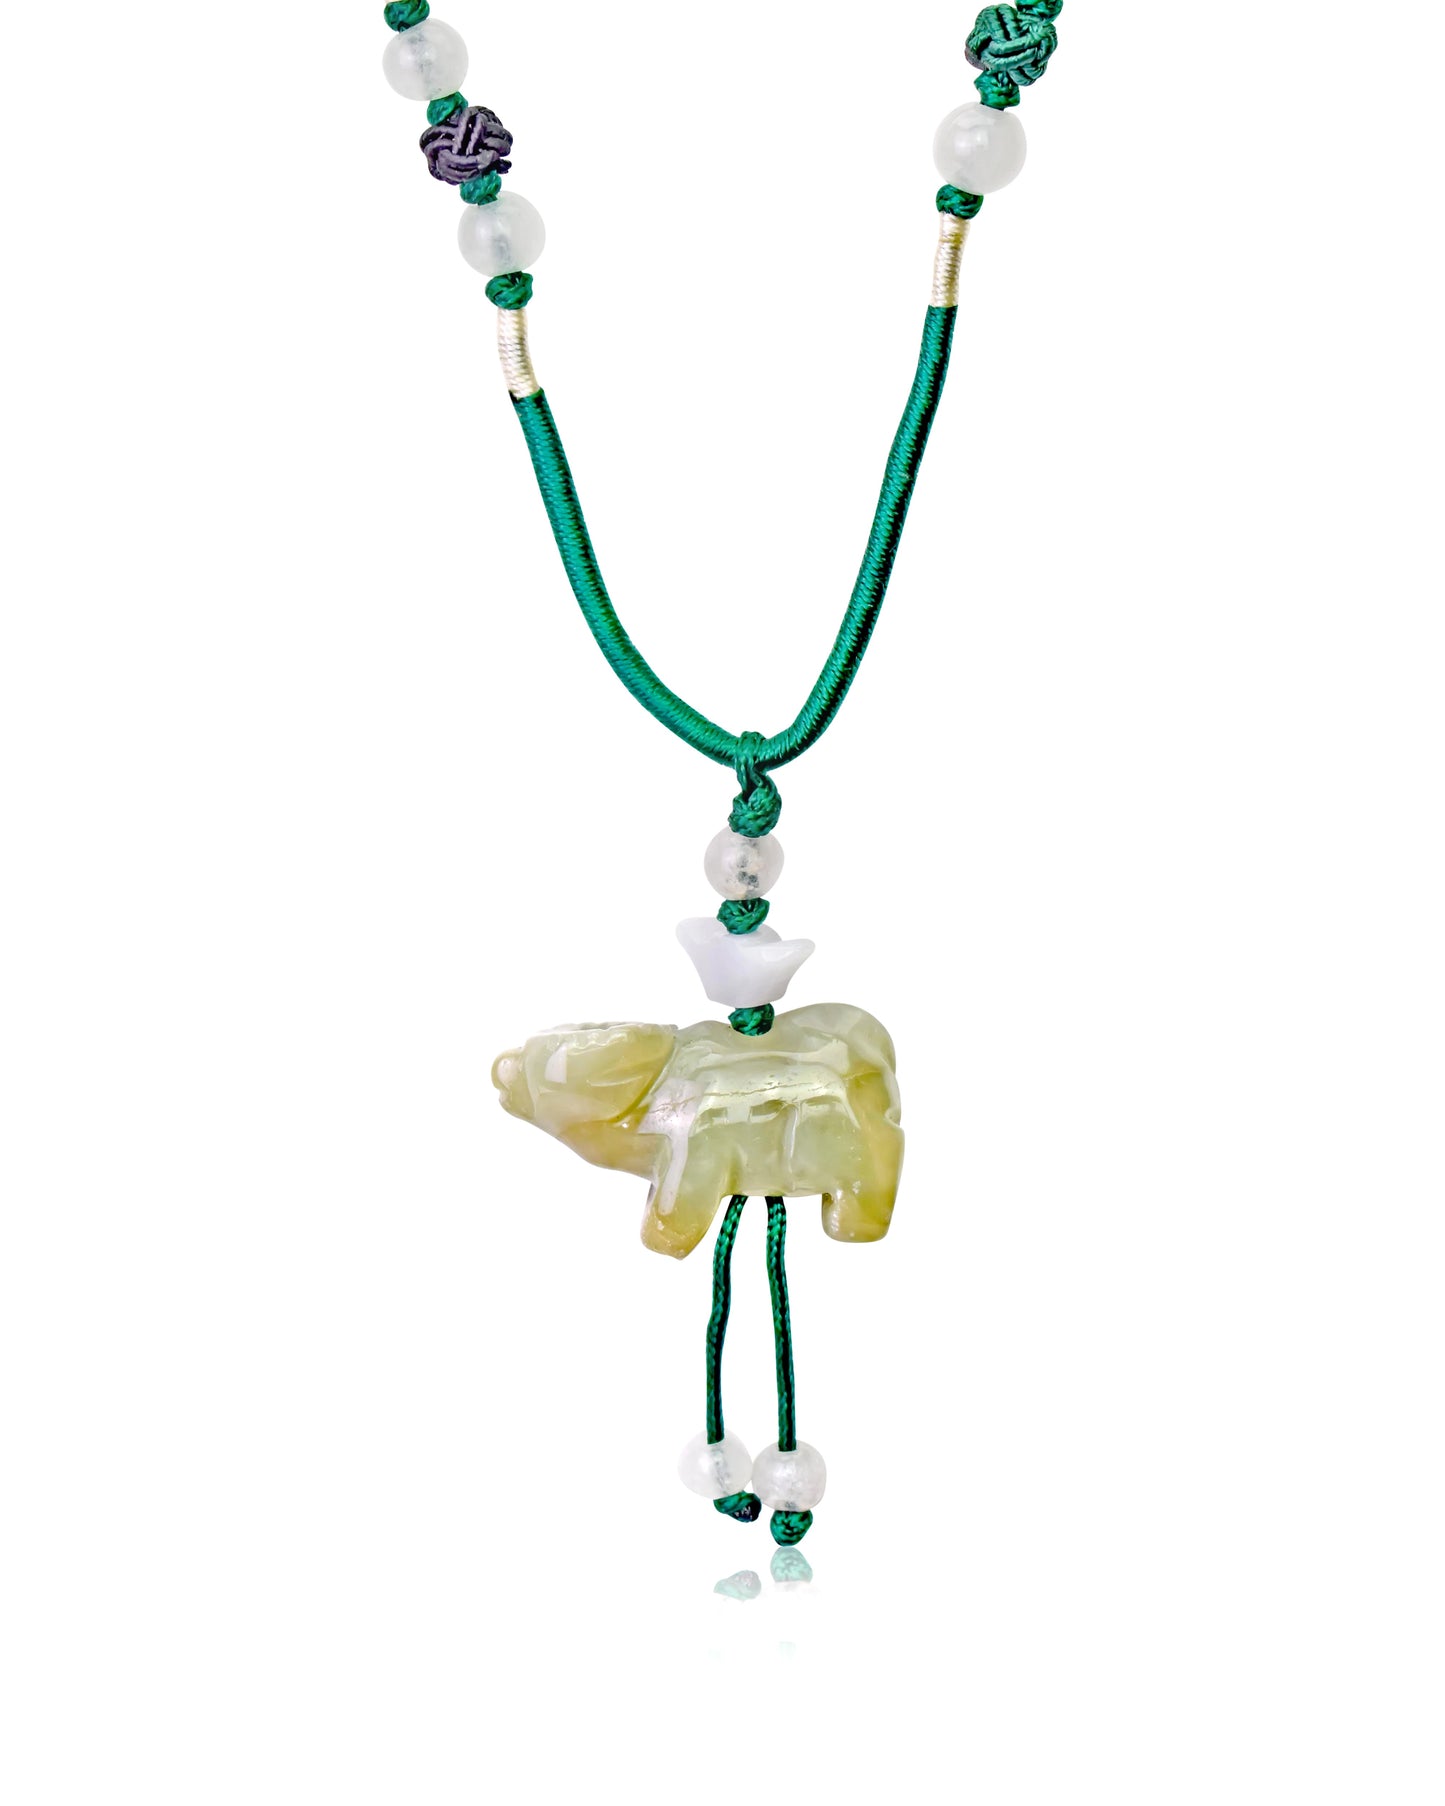 Adorn Yourself with the Ox Chinese Zodiac Handmade Jade Necklace made with Green Cord